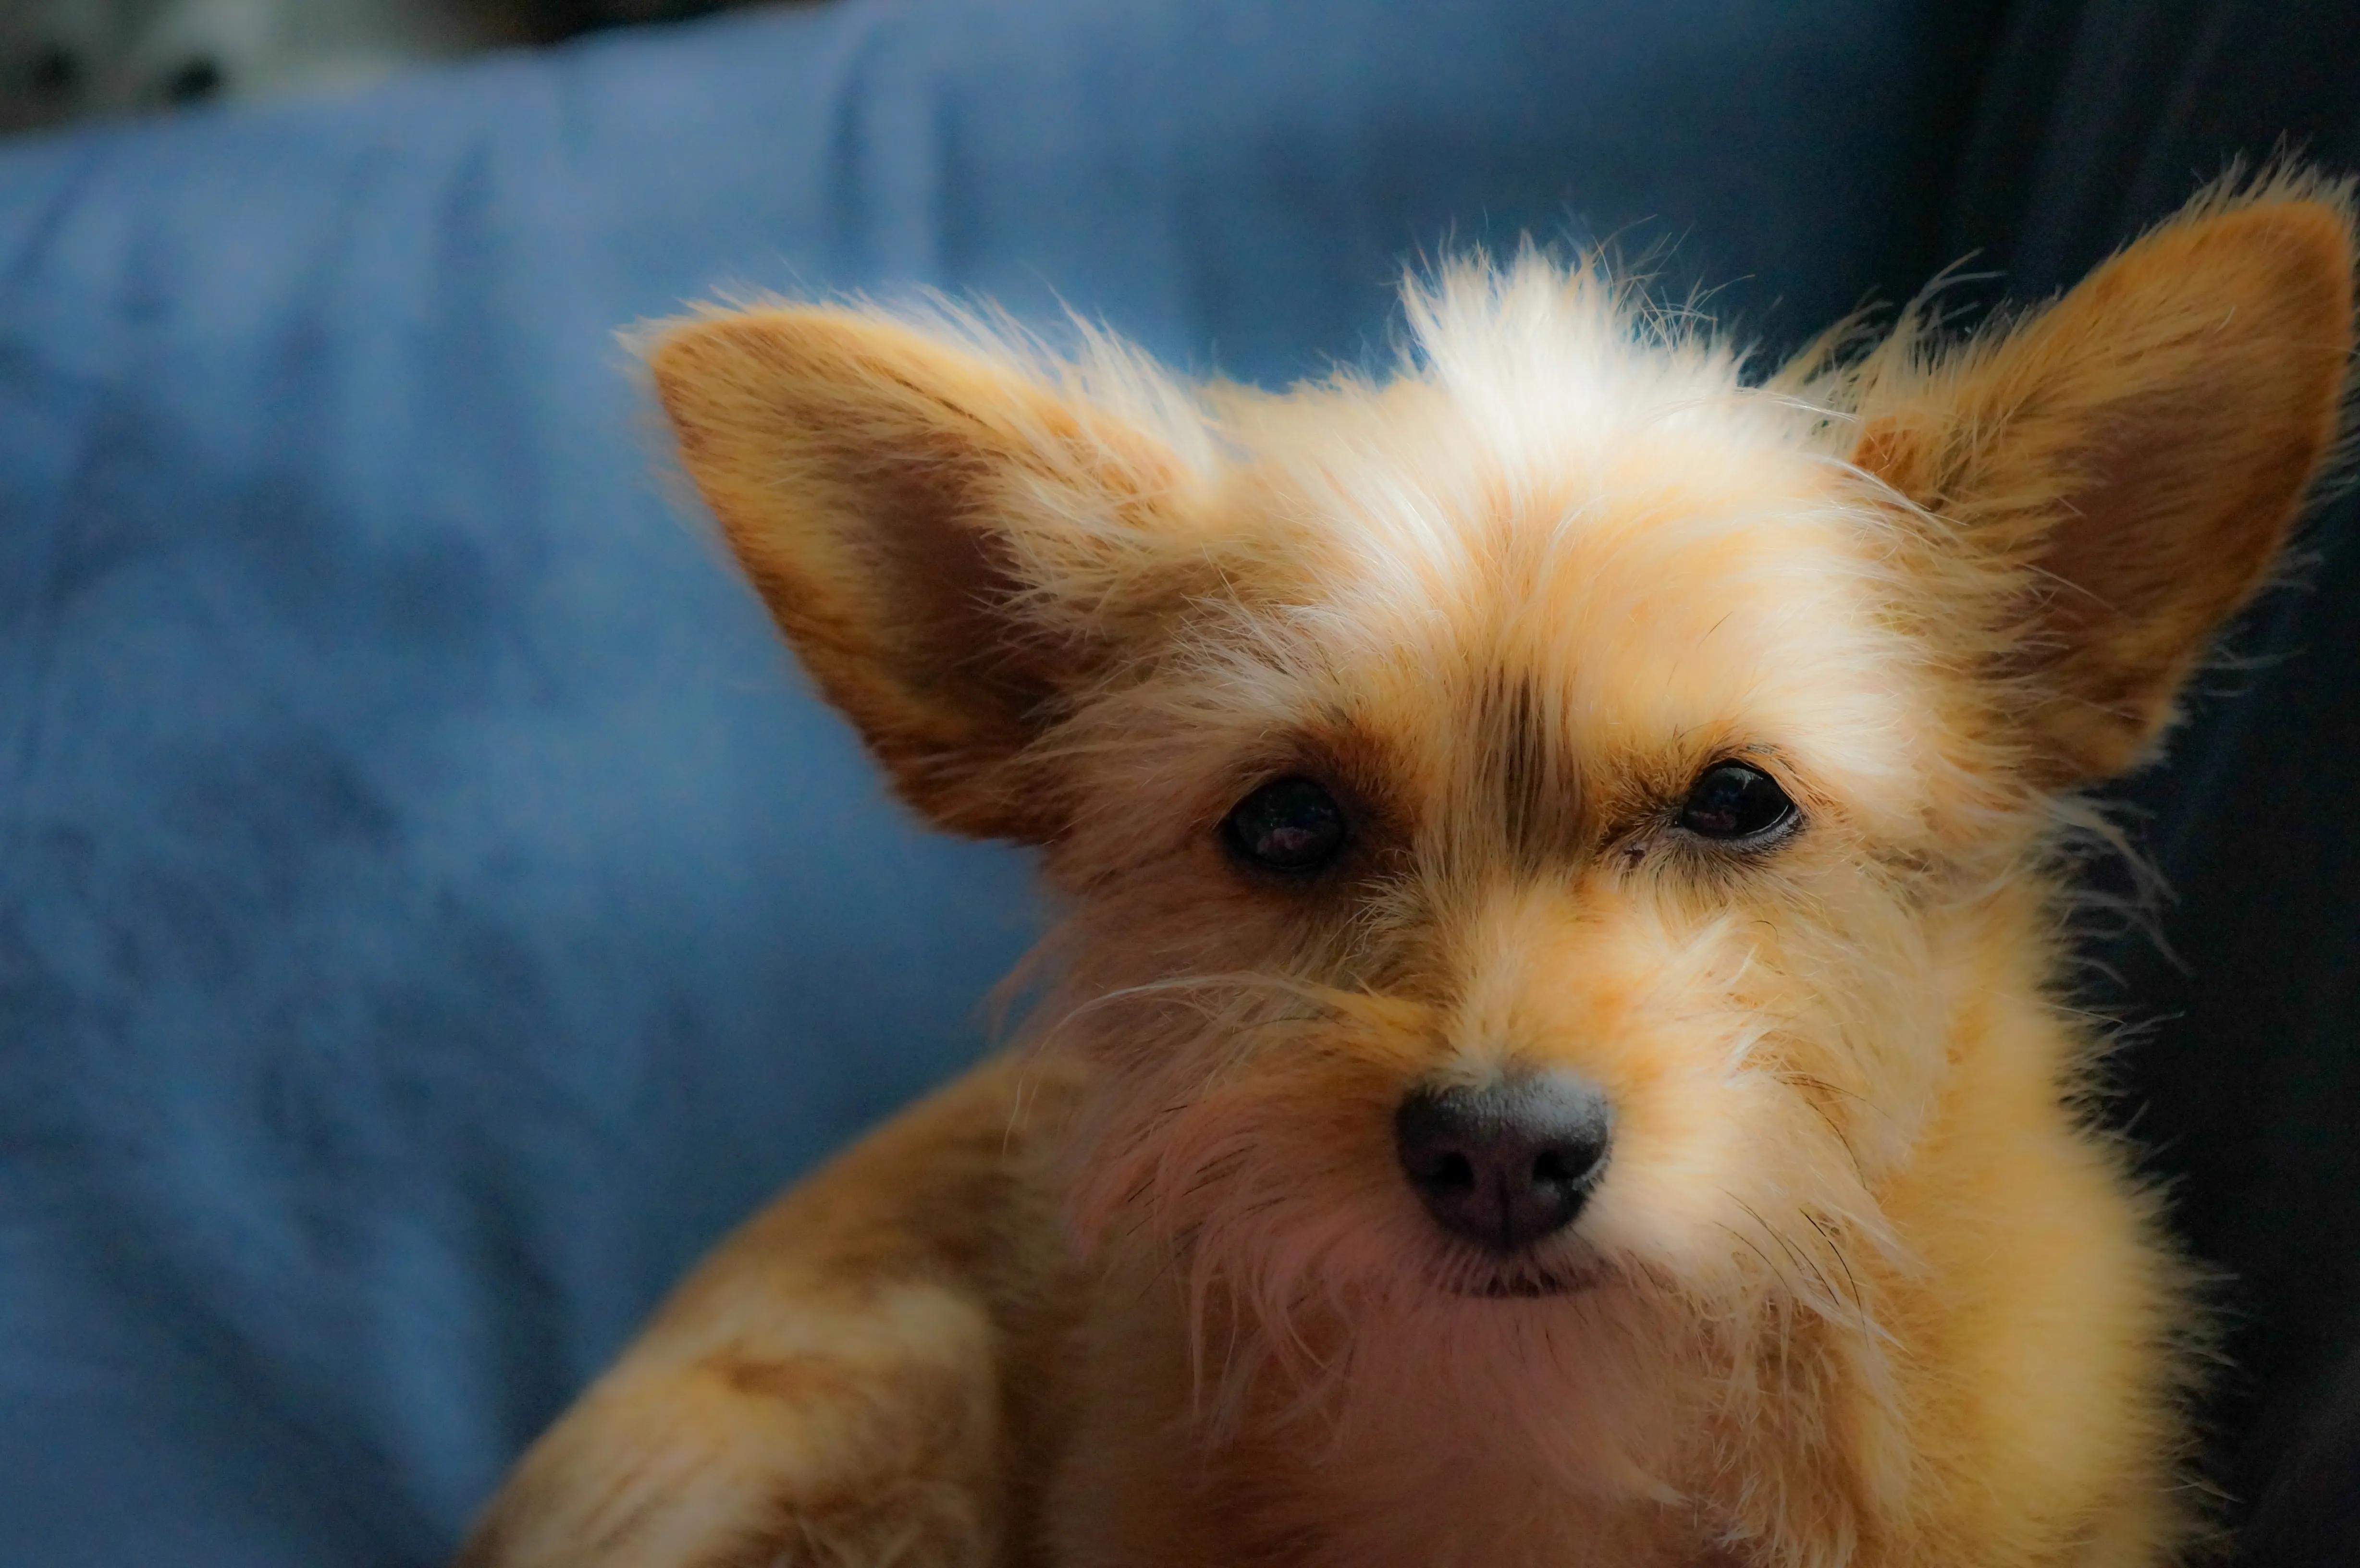 what is a chihuahua yorkie mix called?